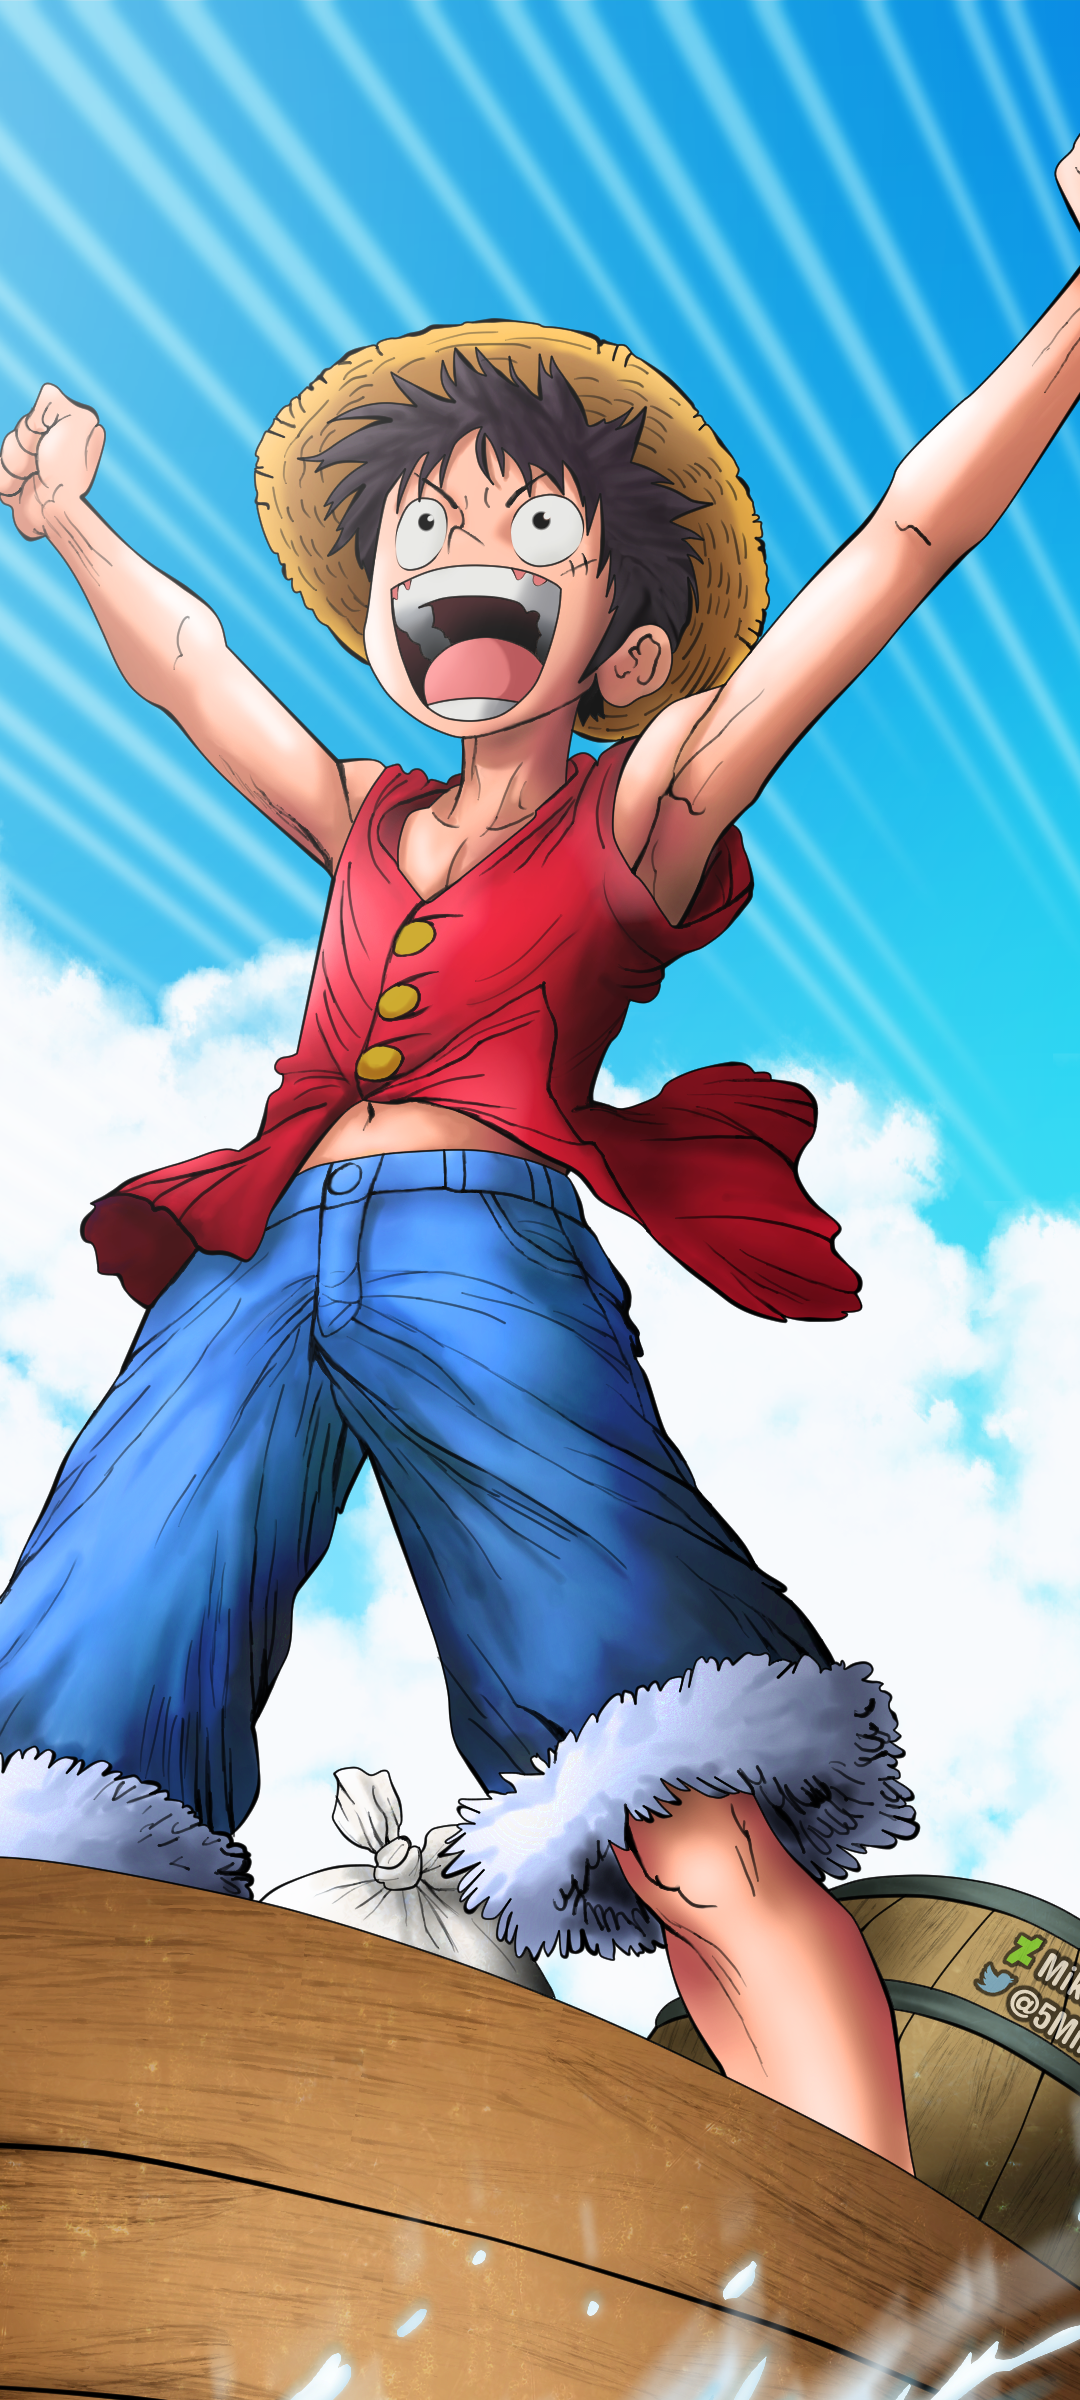 Anime One Piece Phone Wallpaper by Mikepxel